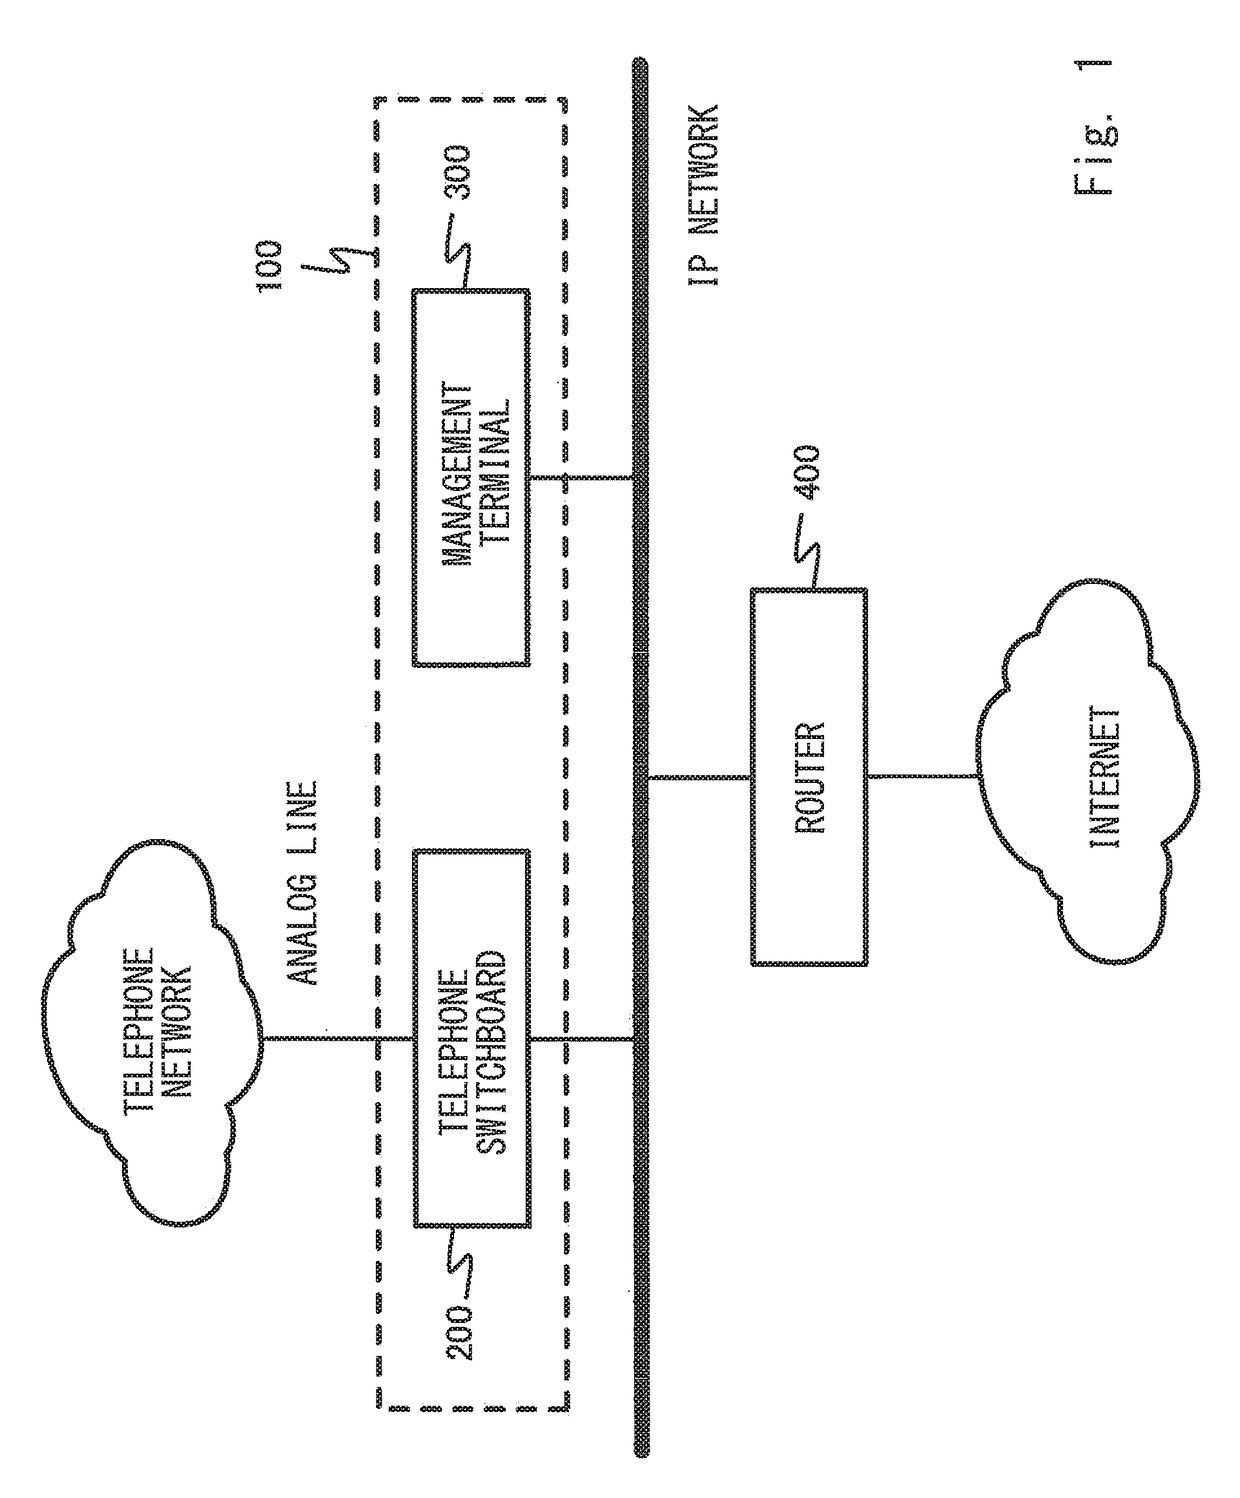 Telephone switching system, telephone switching method, telephone switching program, telephone switchboard, and management terminal